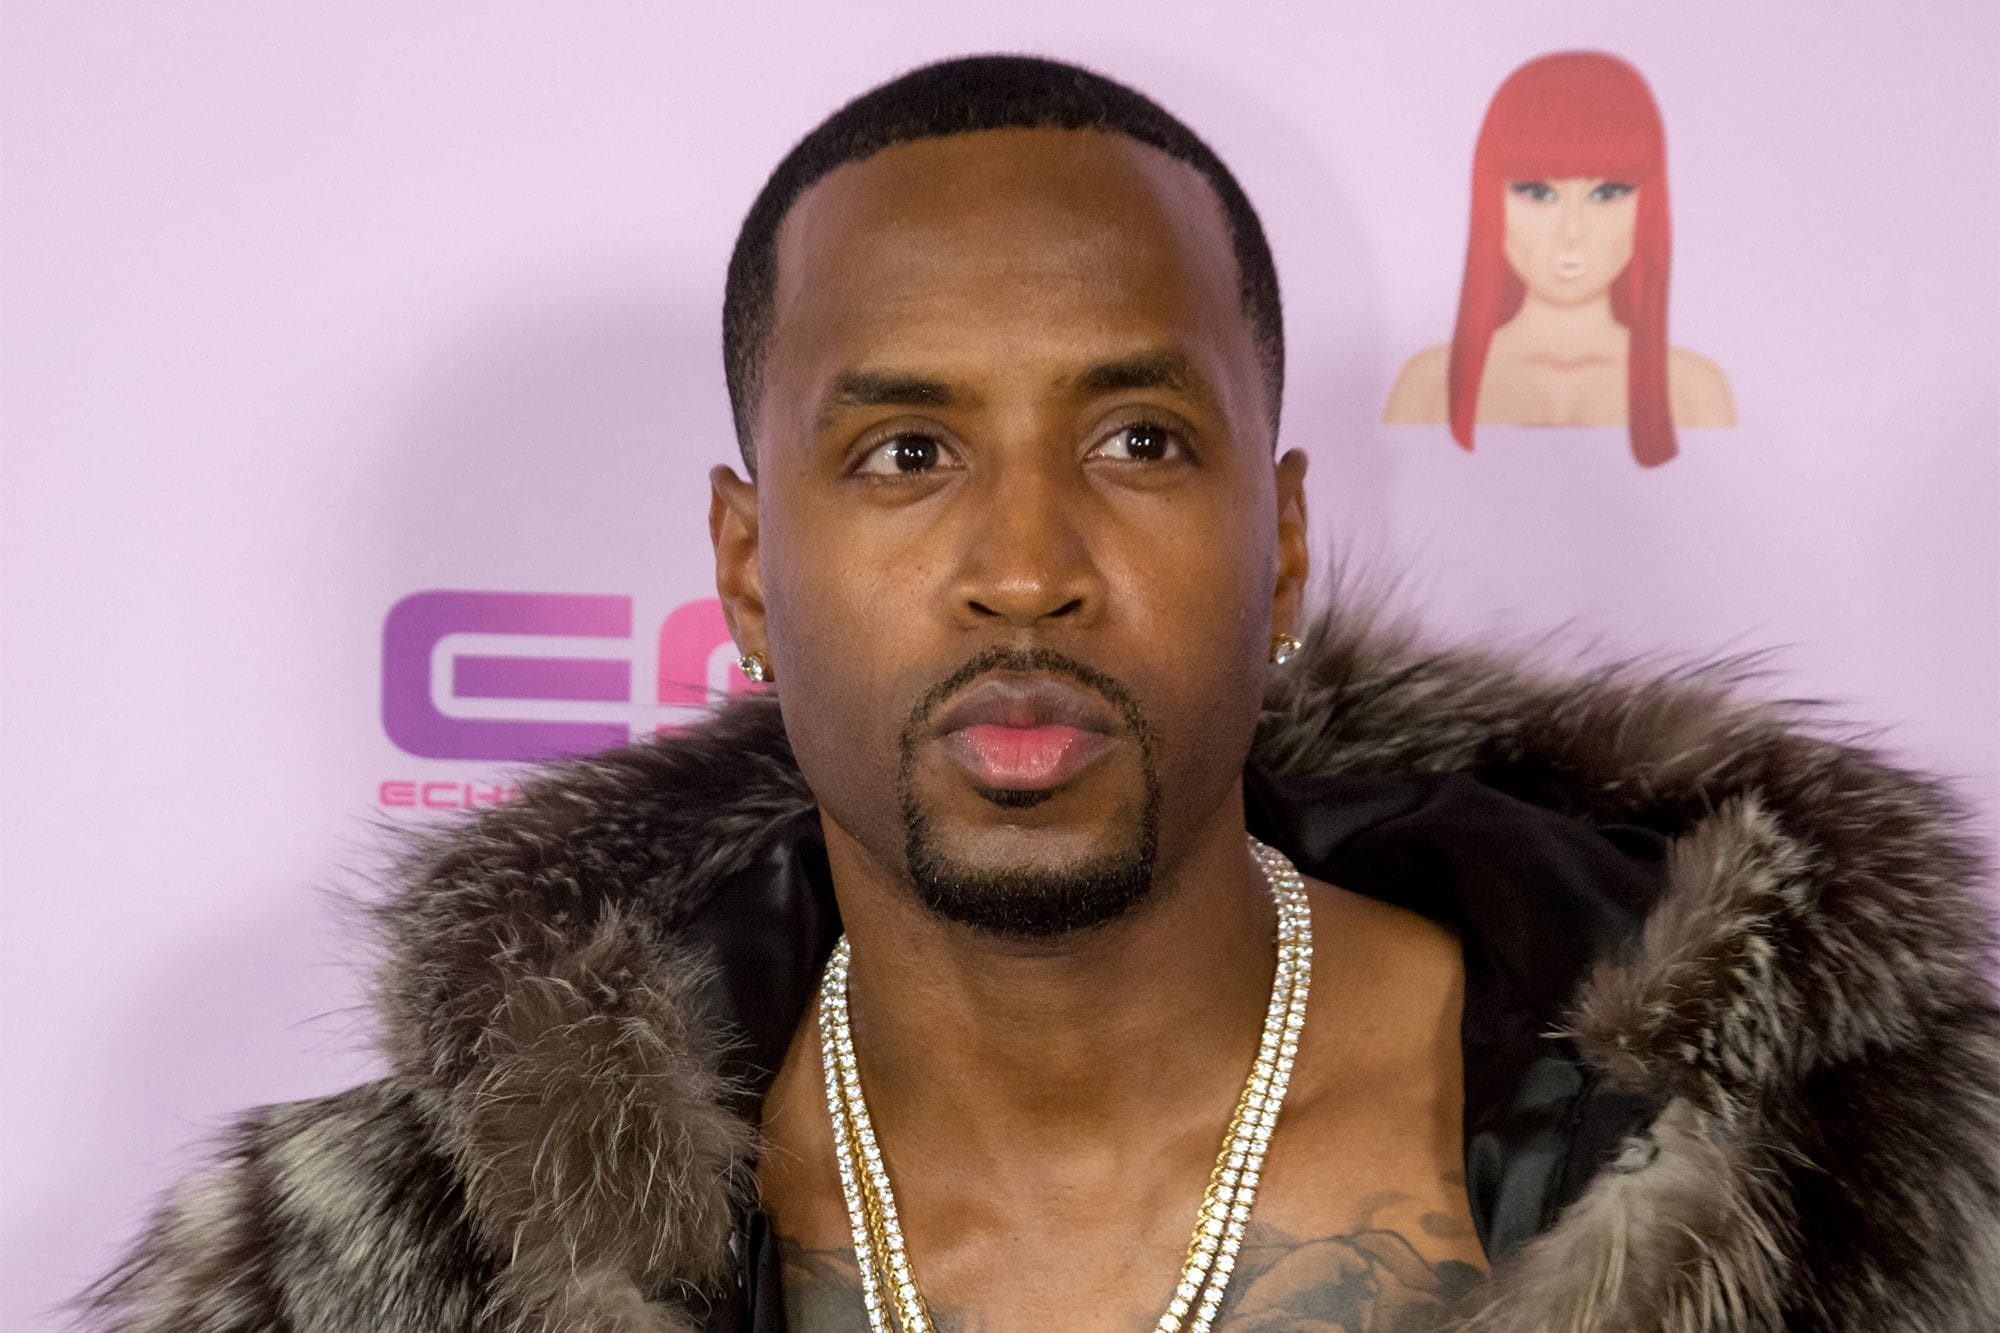 Safaree Motivates Fans With This Photo He Just Shared - Check Out How He Impressed Fans